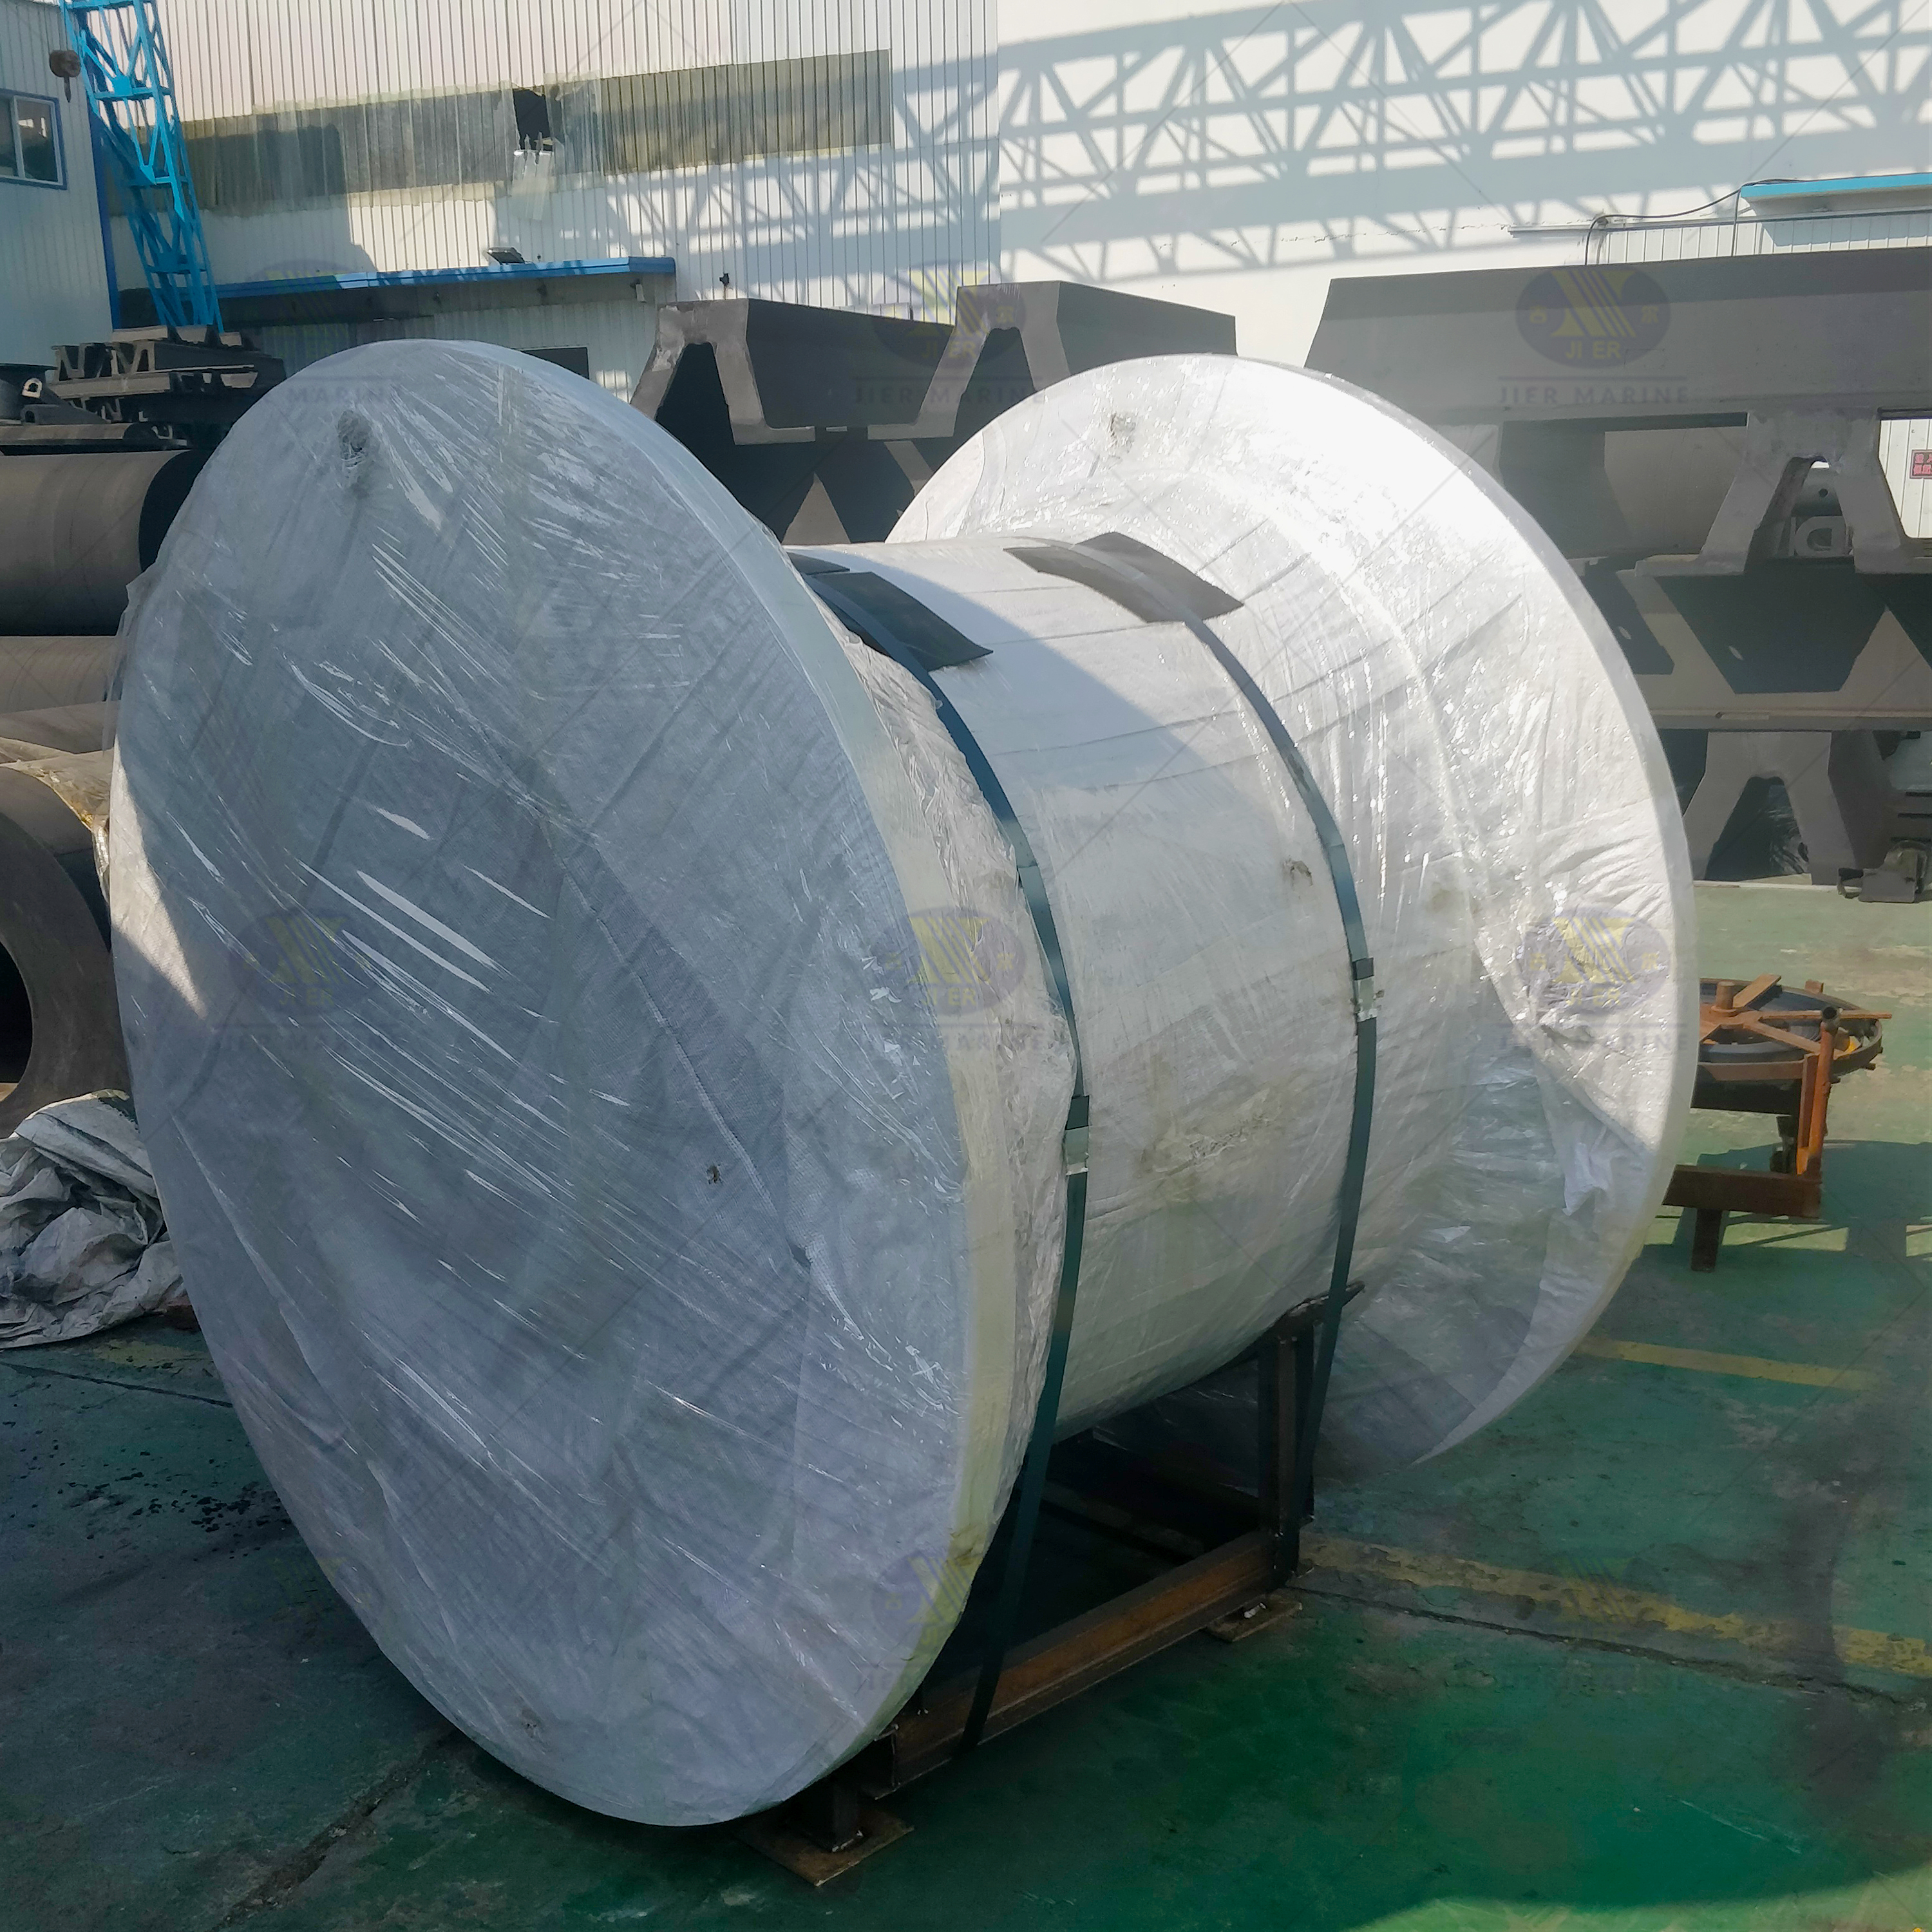 JIER Super Cell Fenders Selected by Port of Charleston, USA (10)